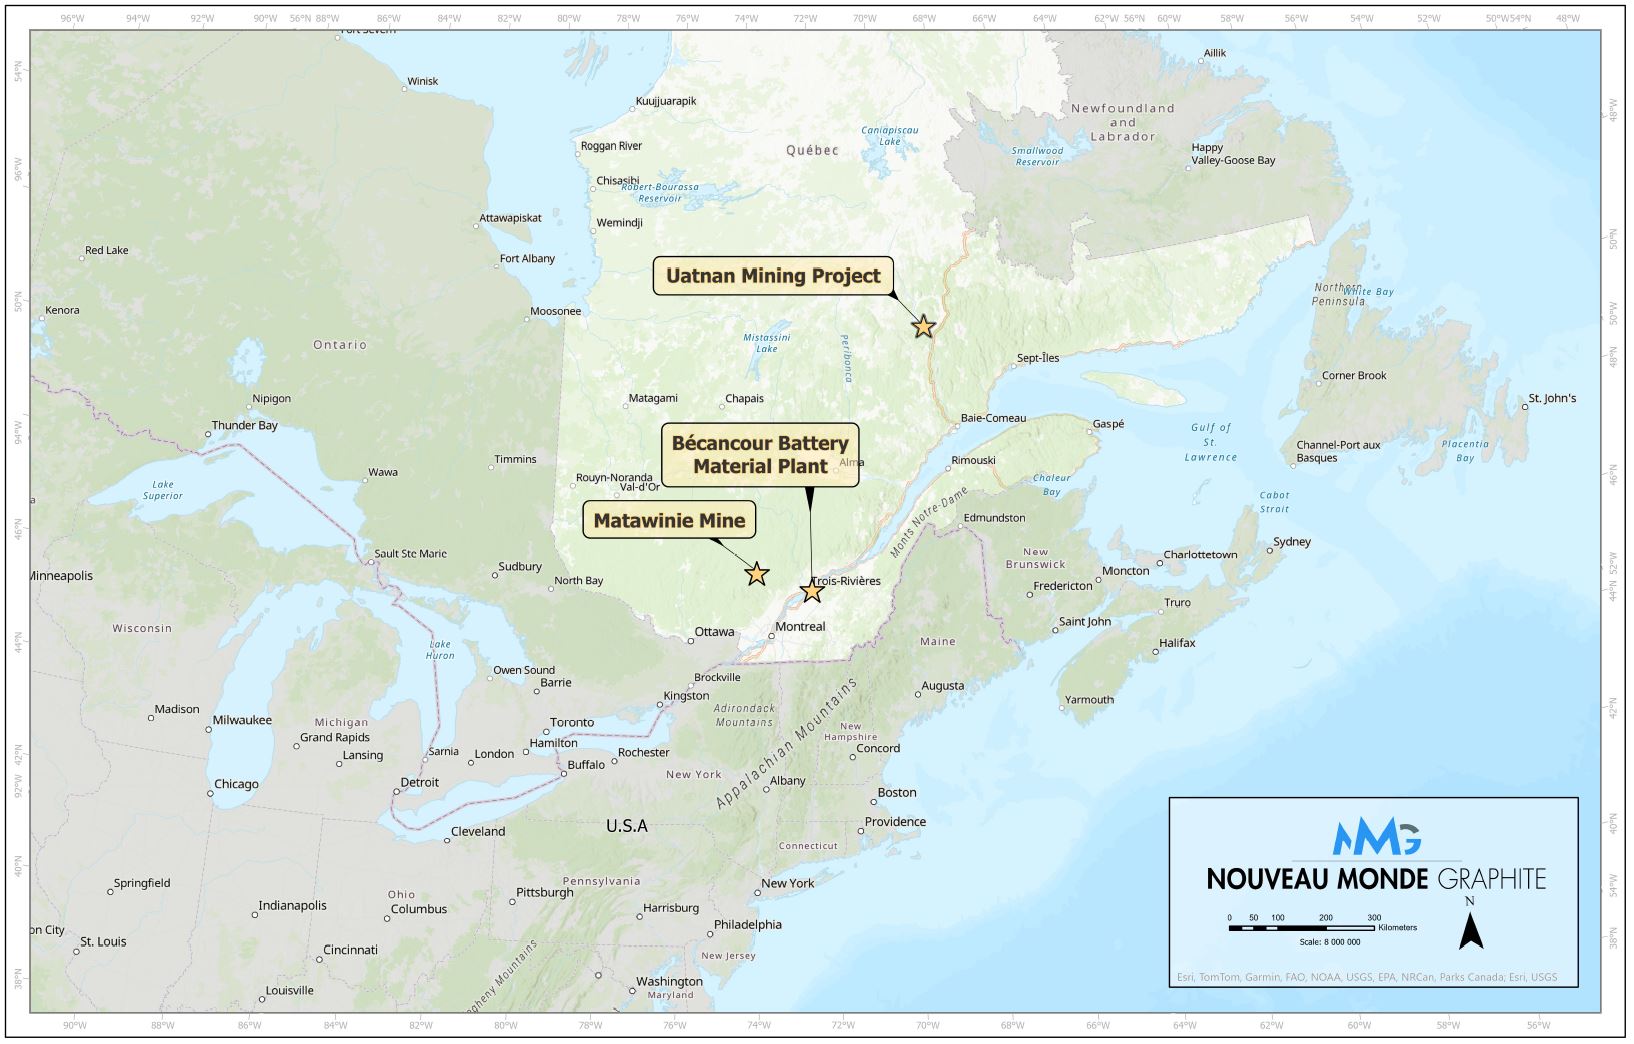 NMG's projects on the Quebec map.